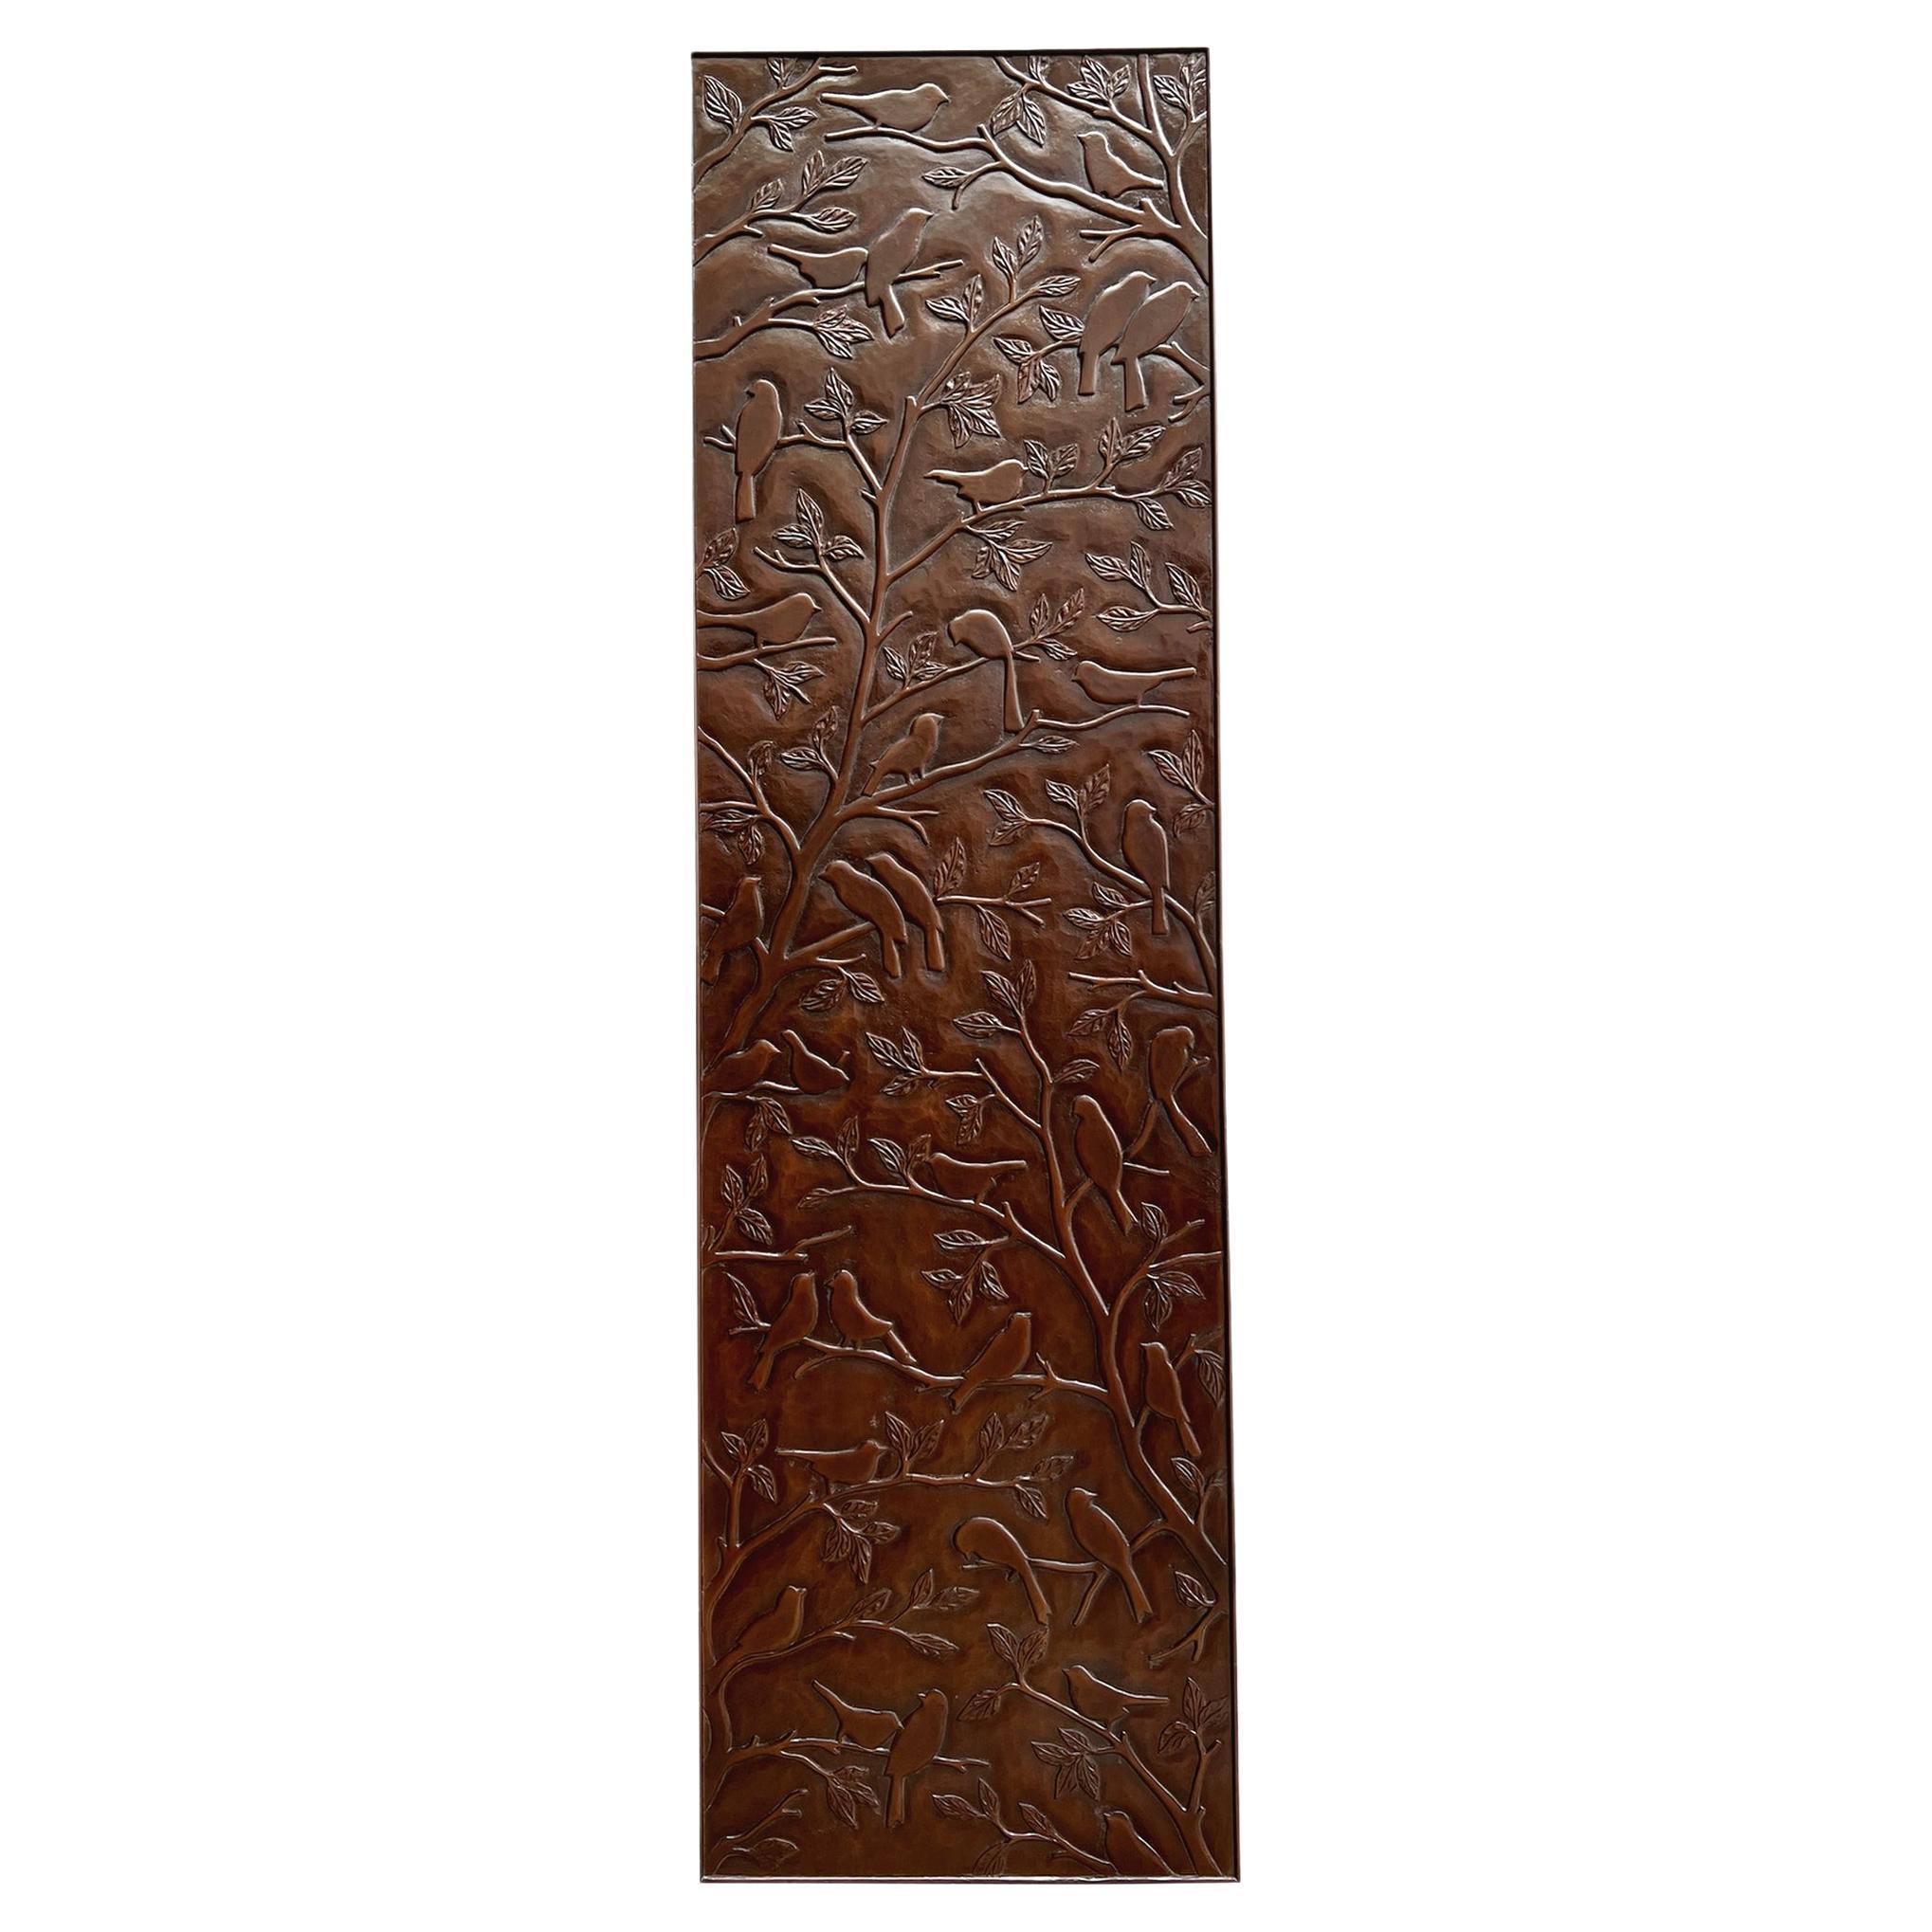 Large carved wood panel decorated with birds, Christopher Guy, circa 2000